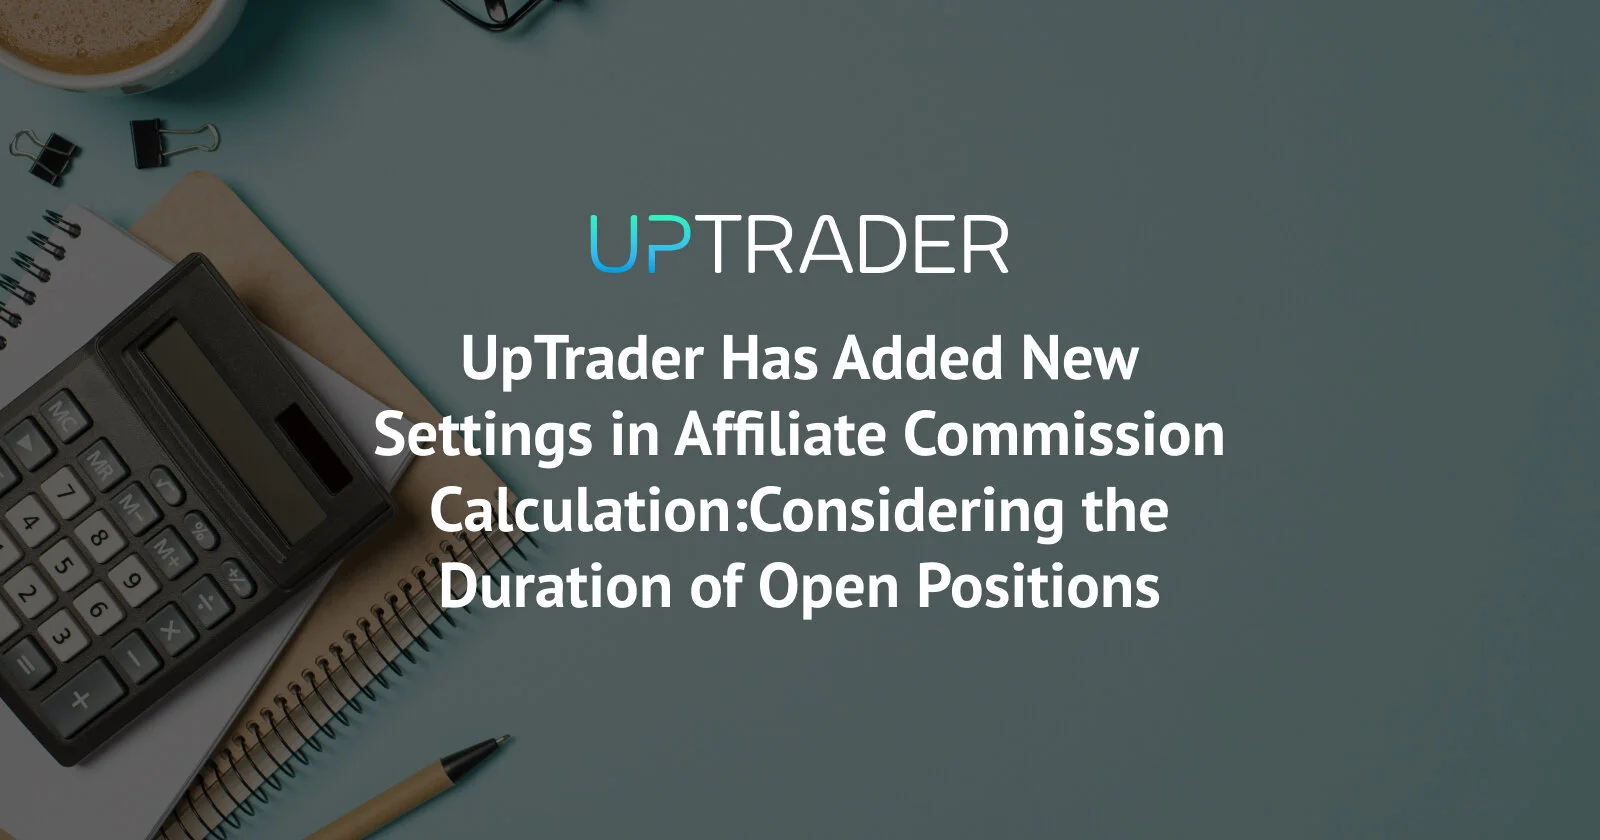 UpTrader Has Added New Settings in Affiliate Commission Calculation: Considering the Duration of Open Positions